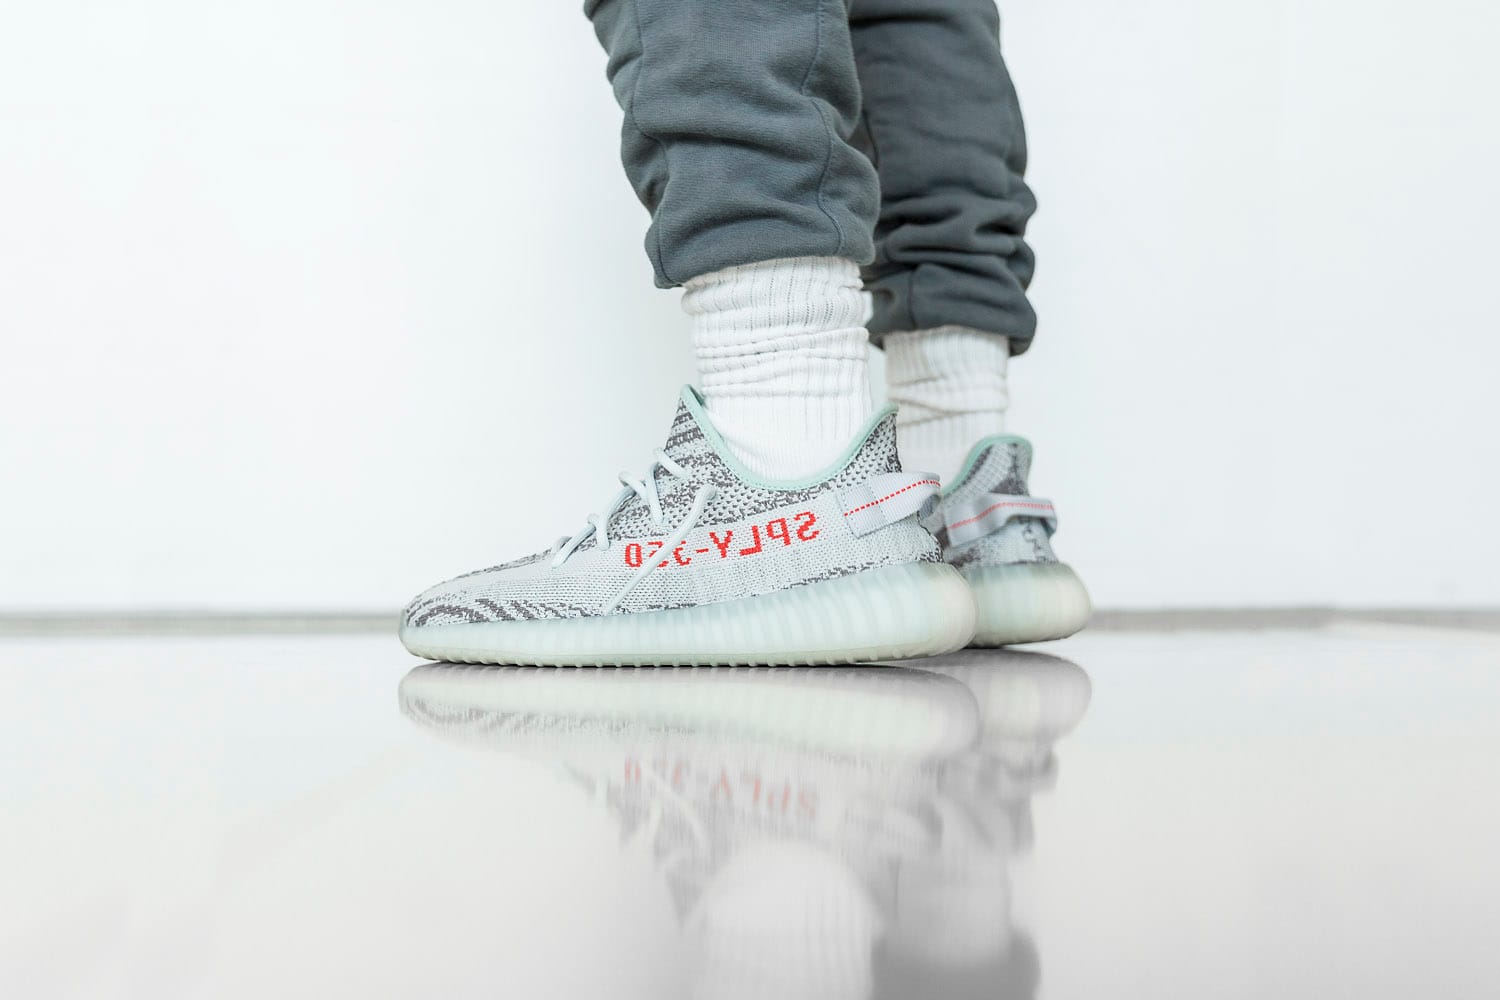 yeezy boost 350 v2 blue tint outfit